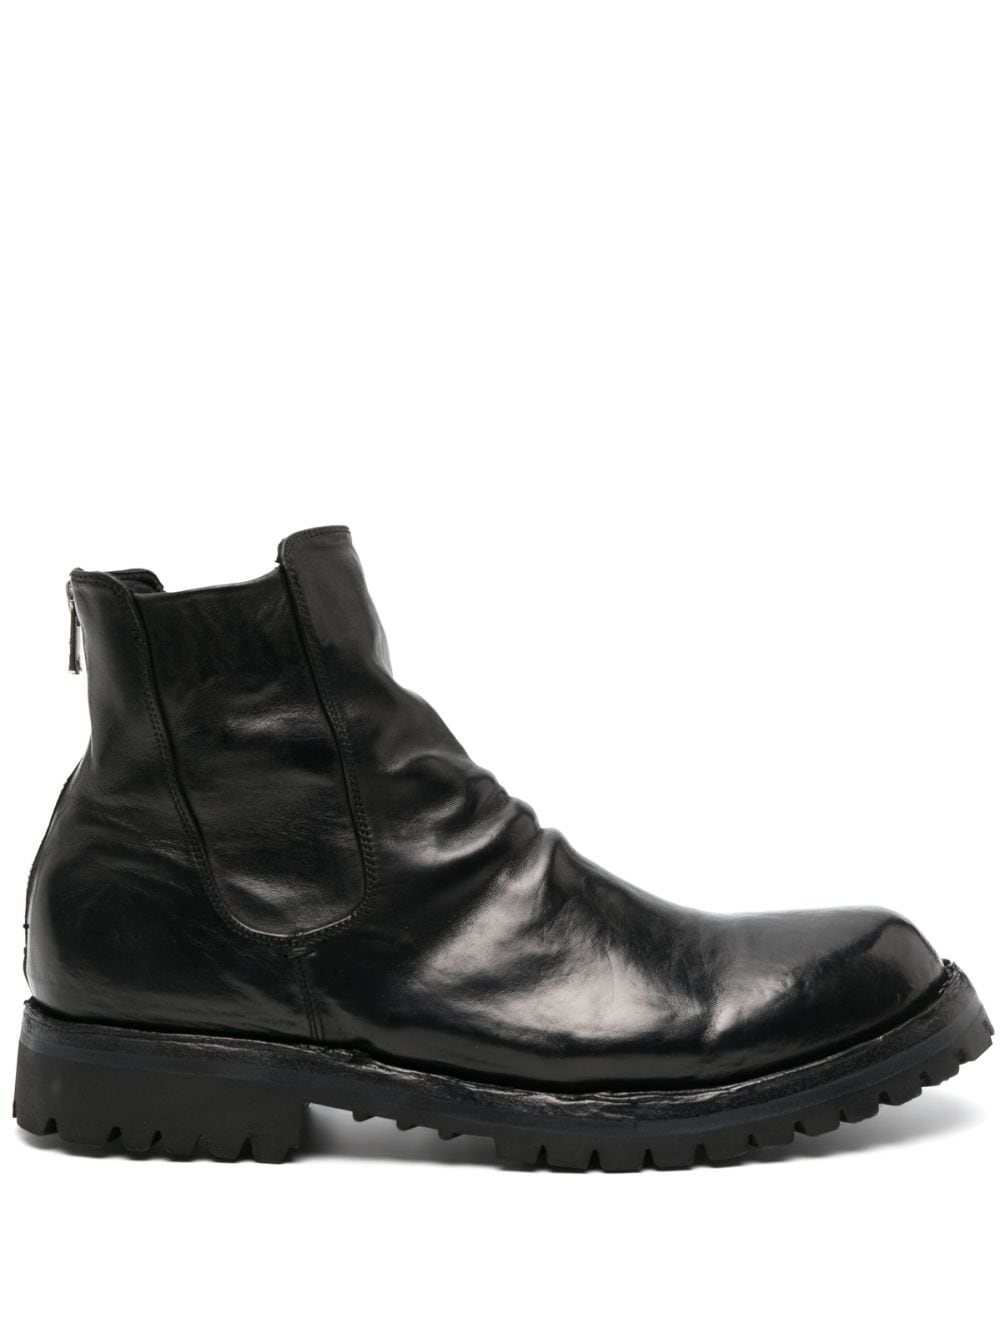 Officine Creative Ikonic 005 leather ankle boots - Black von Officine Creative